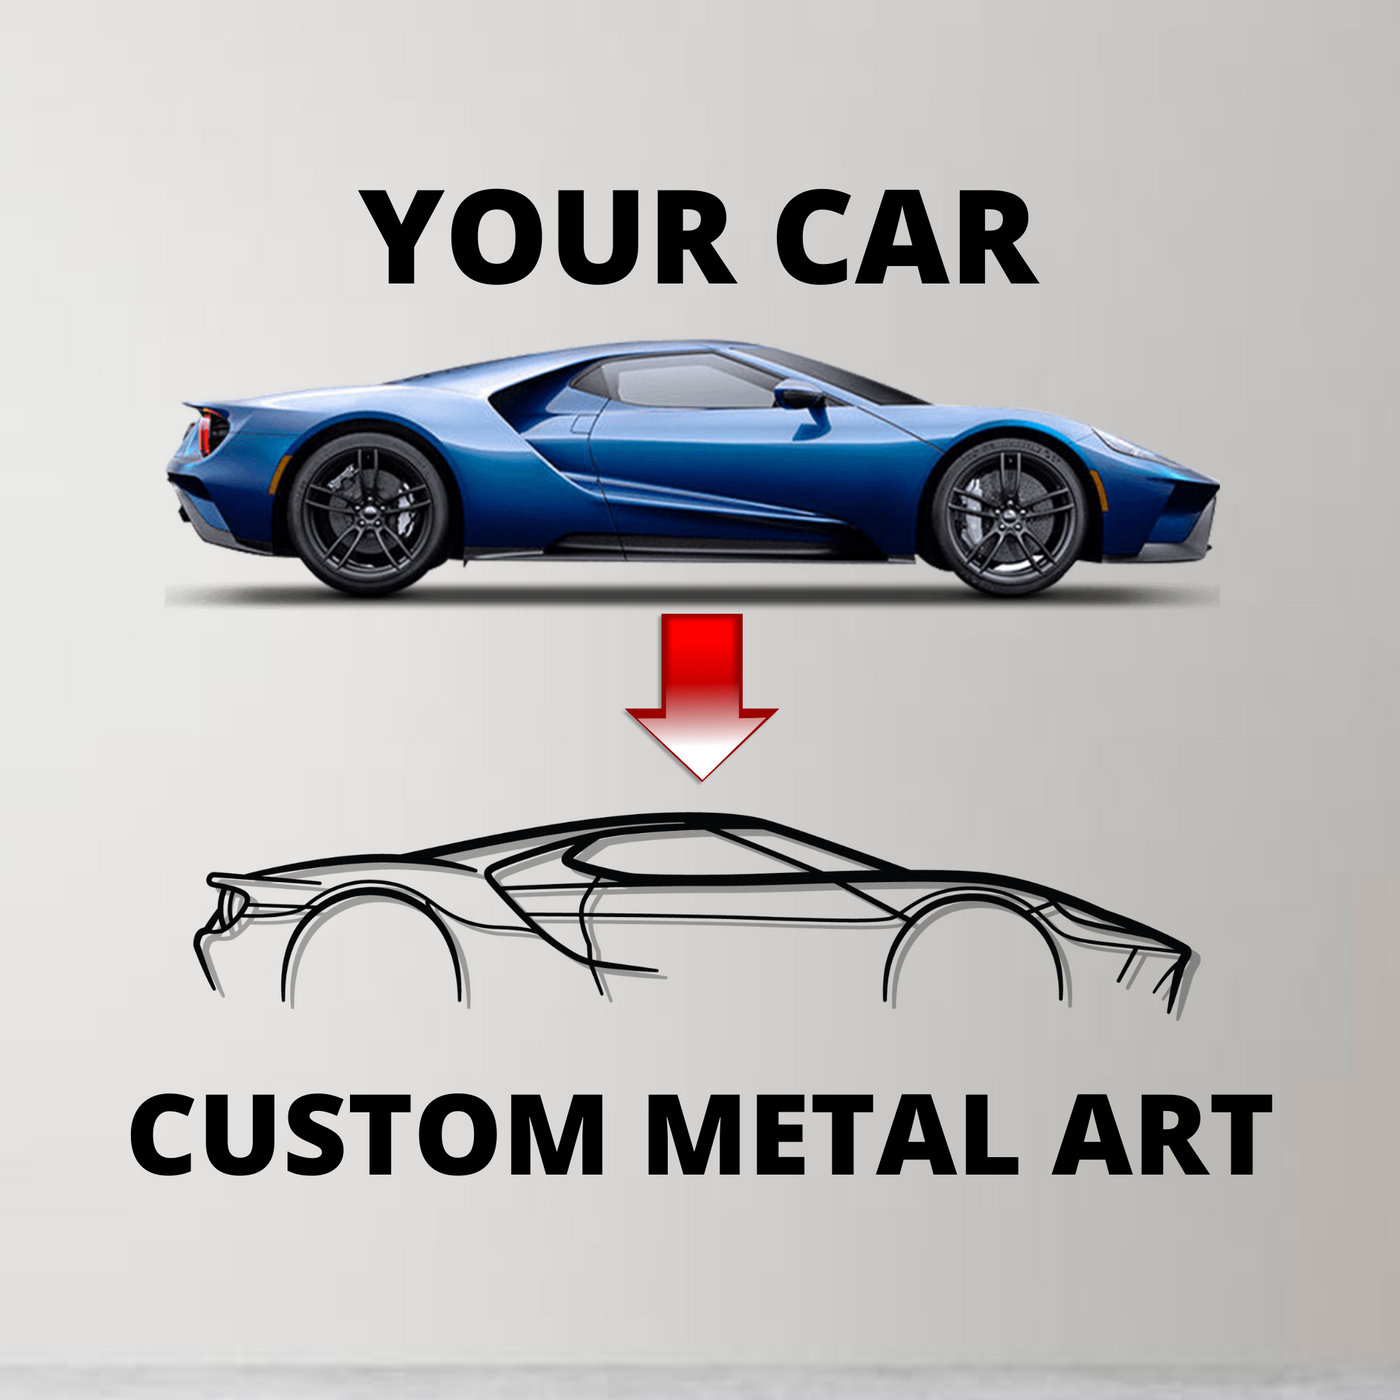 E53 AMG Coupe Detailed Silhouette Metal Wall Art